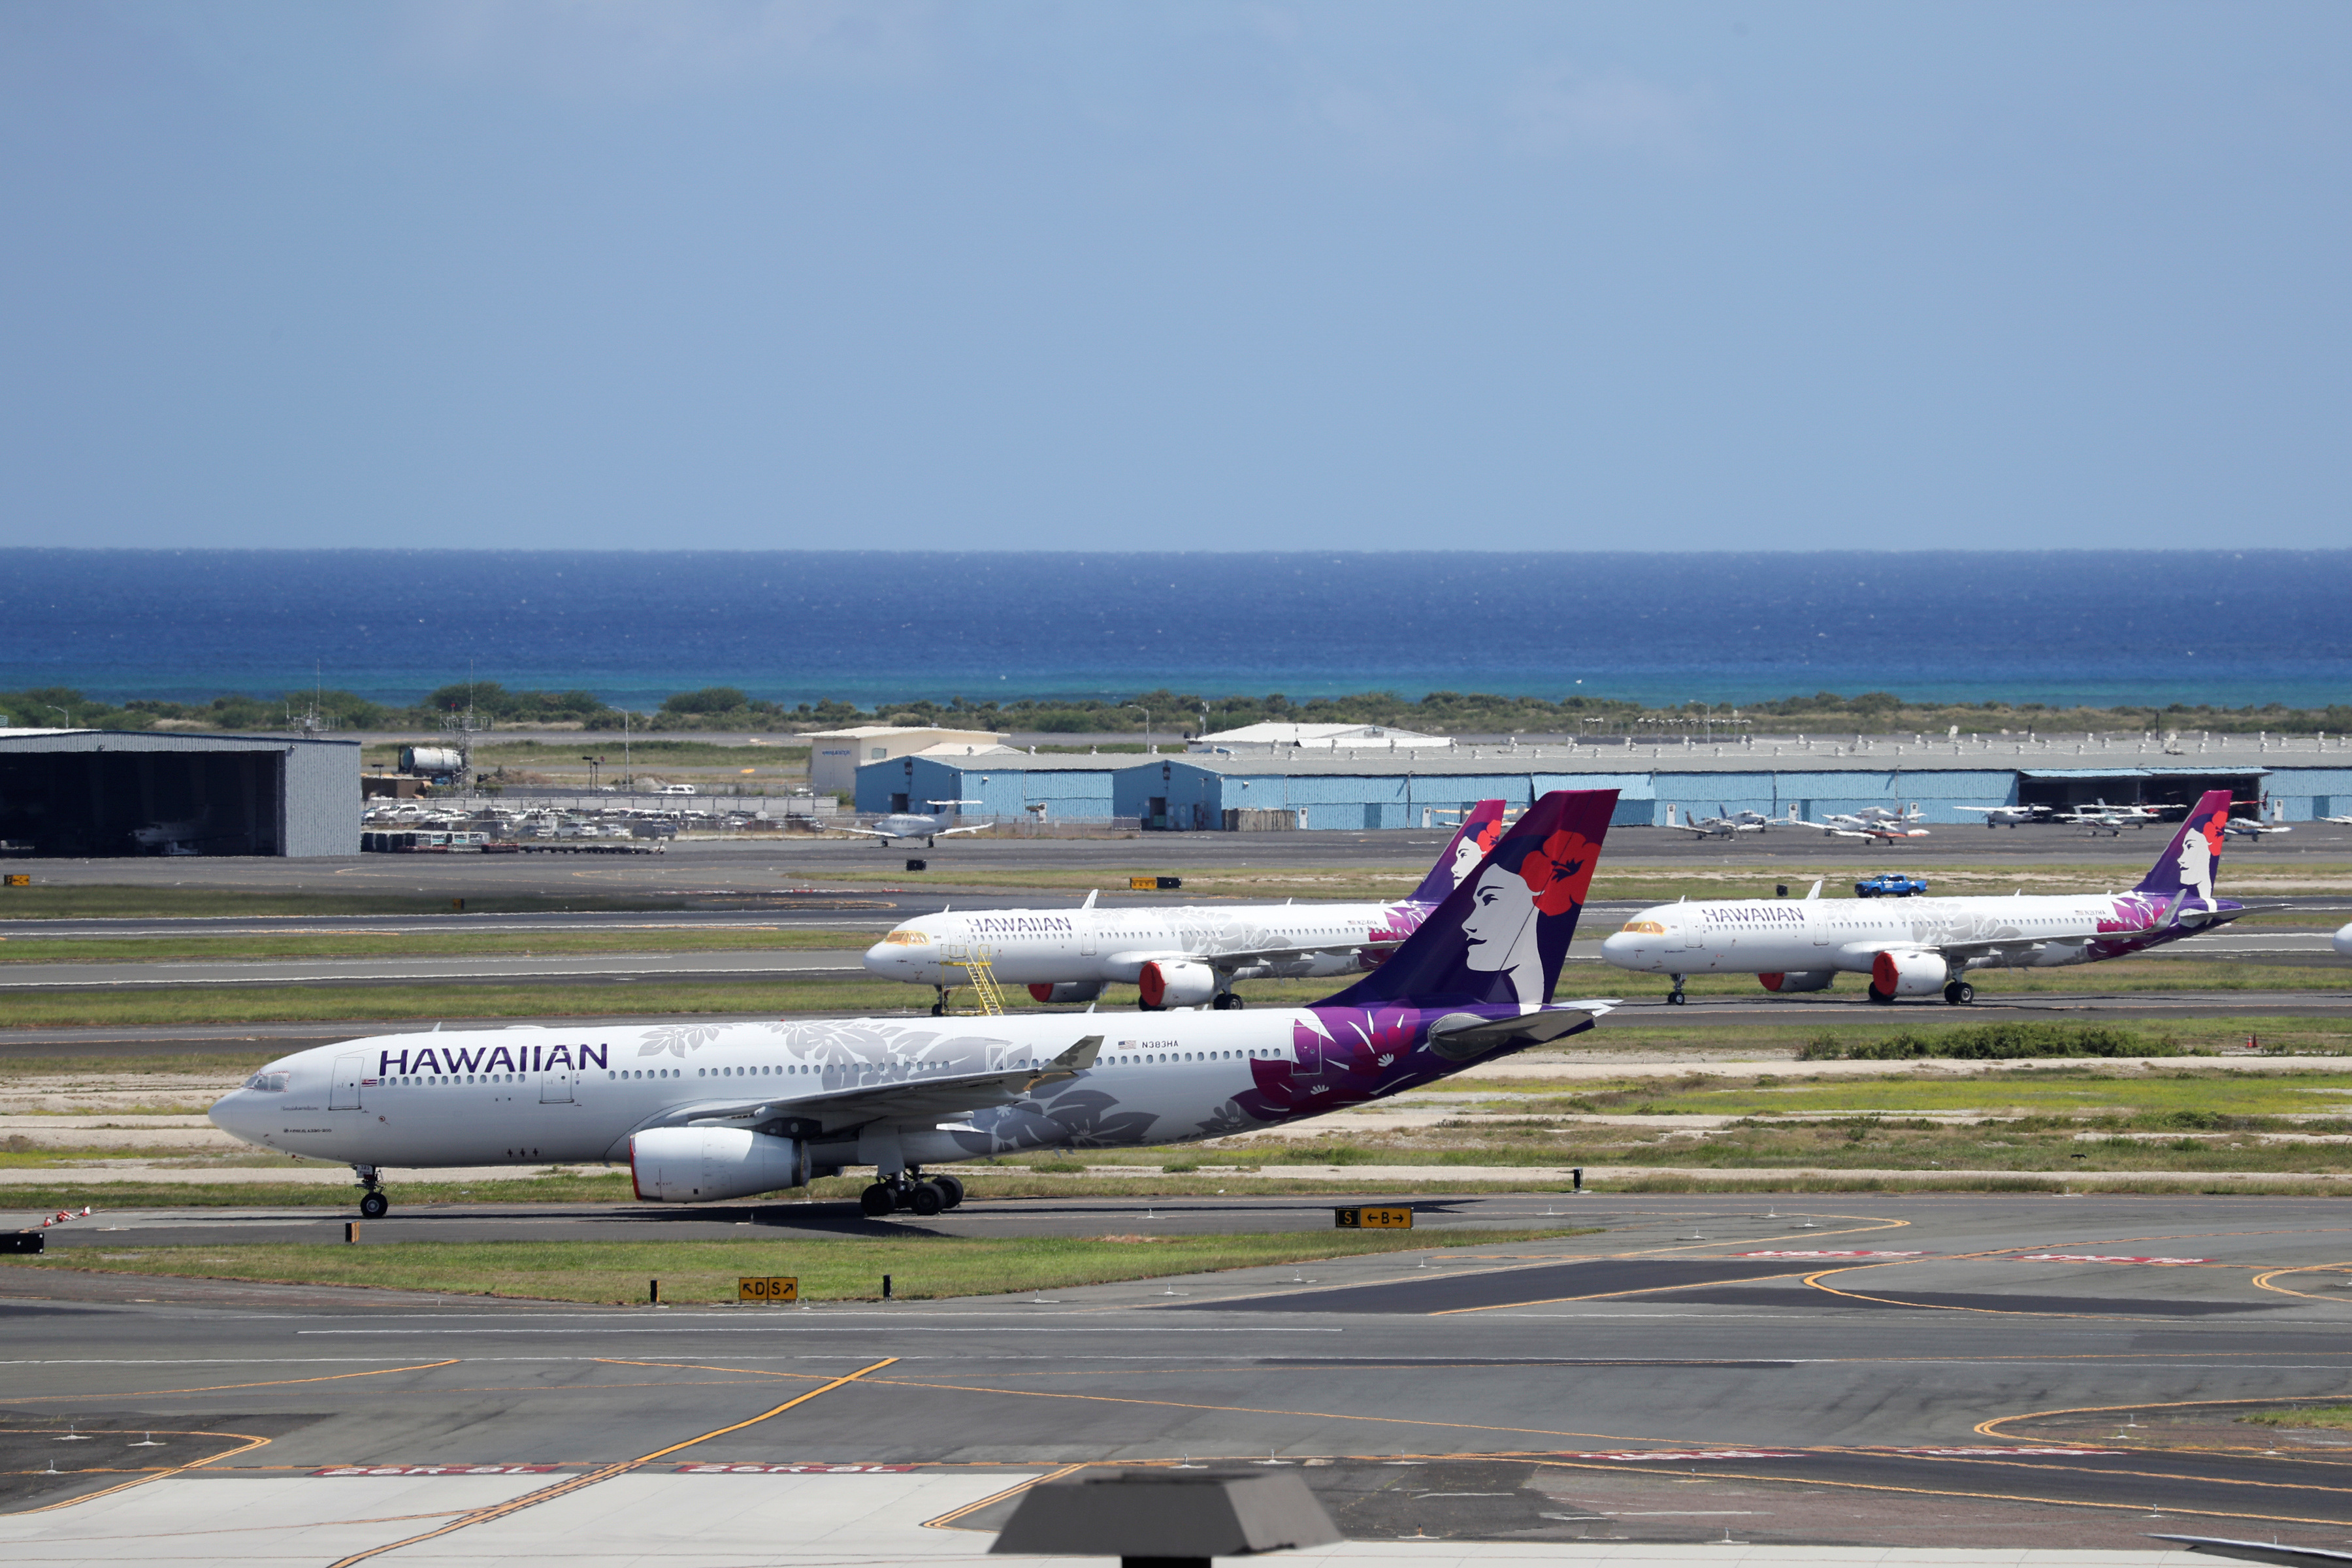 Hawaiian Airlines airplanes sit idle on the runway at the Daniel K. Inouye International Airport due to the business downturn caused by the coronavirus disease (COVID-19) in Honolulu